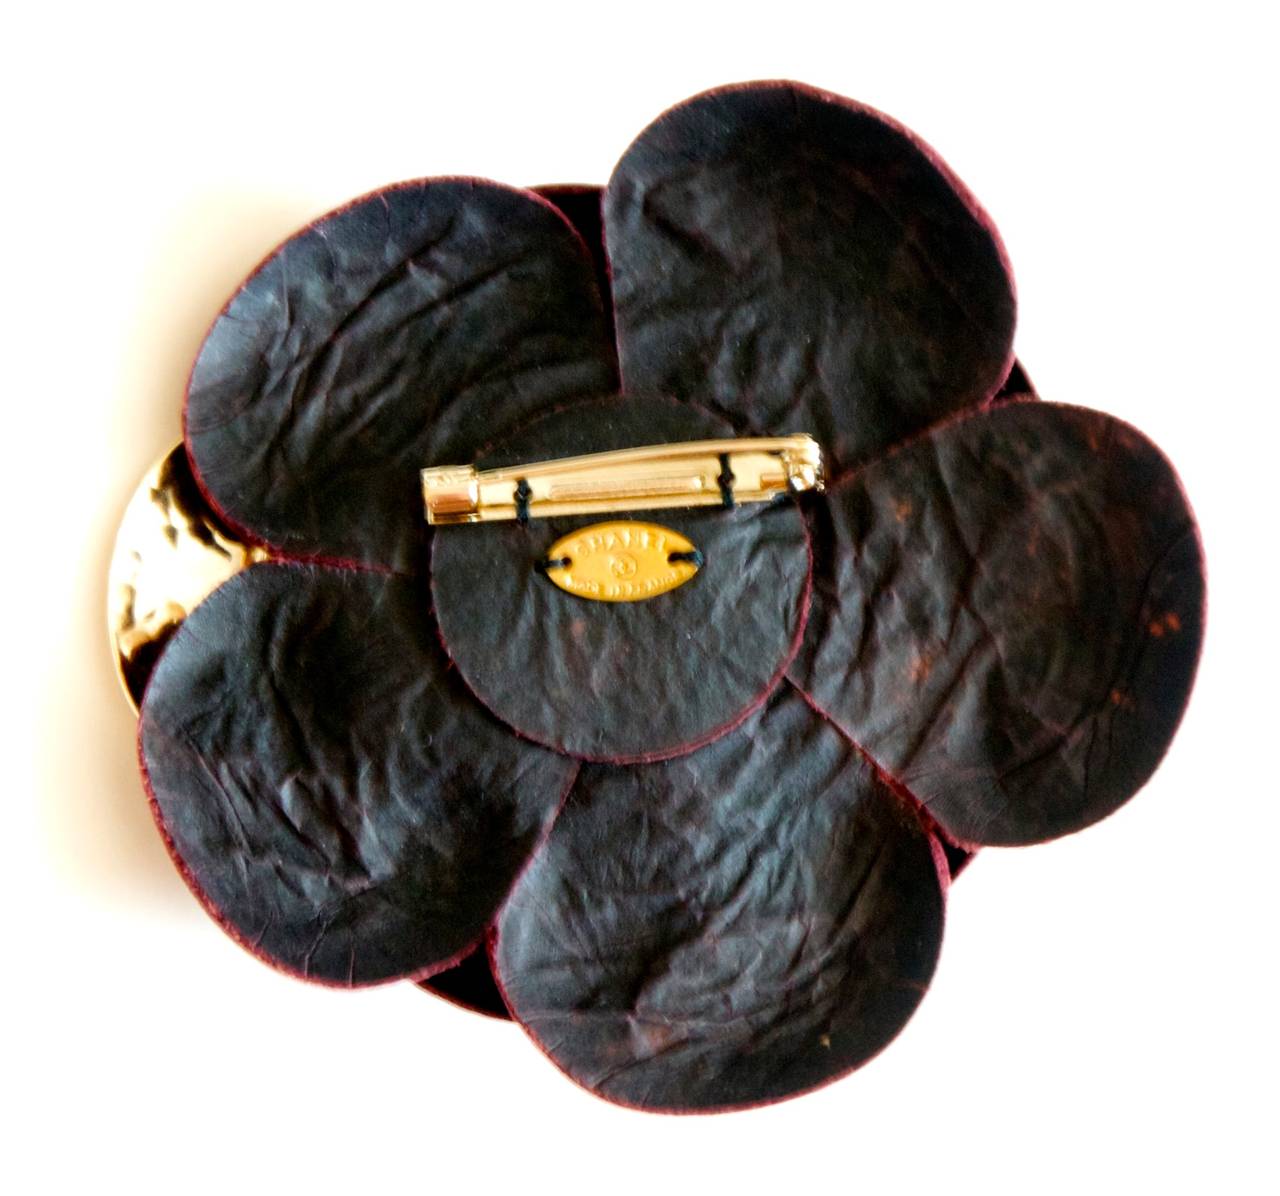 Chanel lambskin leather and brass camellia flower pin. Beautiful camellia in a rich burgundy lambskin. One of the pedals is a hammered brass with an embossed Chanel CC logo. Pin is also signed on back with small brass Chanel insignia. Truly a